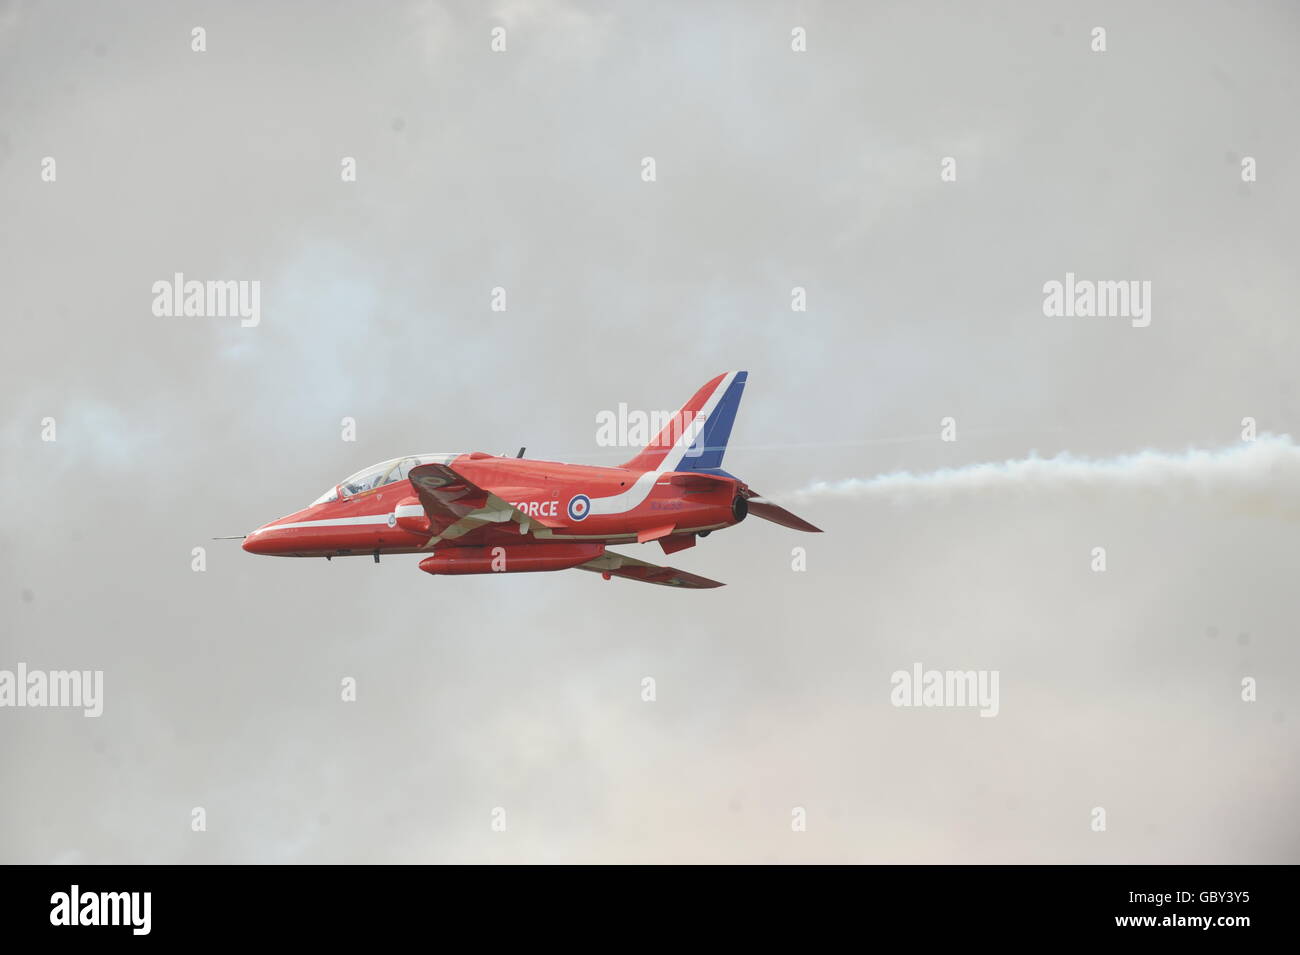 The Red Arrows, the Royal Air Force Acrobatic Team, bases at RAF Scampton flying BAe Hawk aircraft at the Royal International Air Tattoo at RAF Fairford, Gloucestershire. Stock Photo